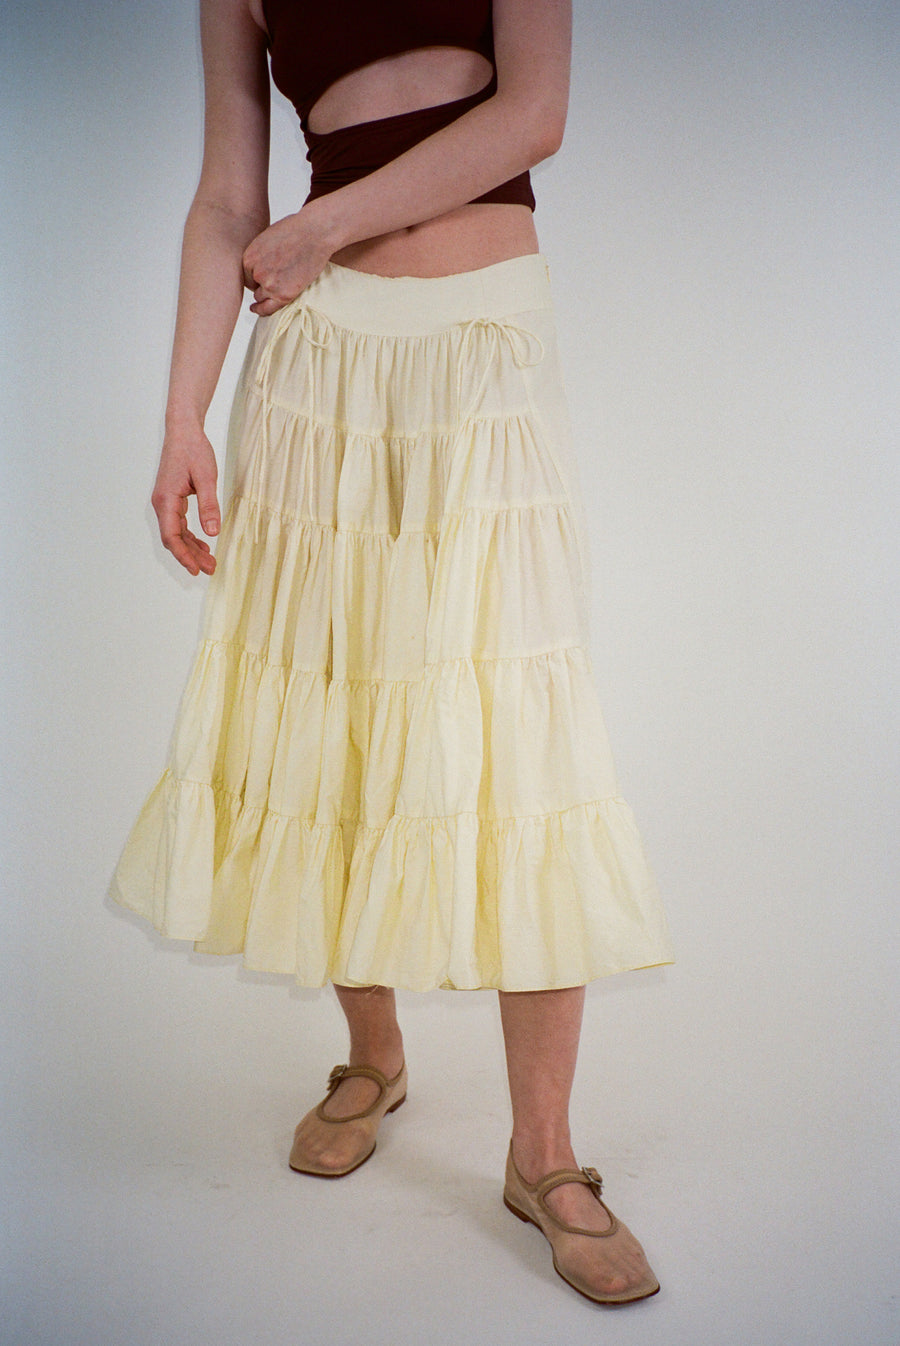 Midi length skirt in yellow with tiered construction on model